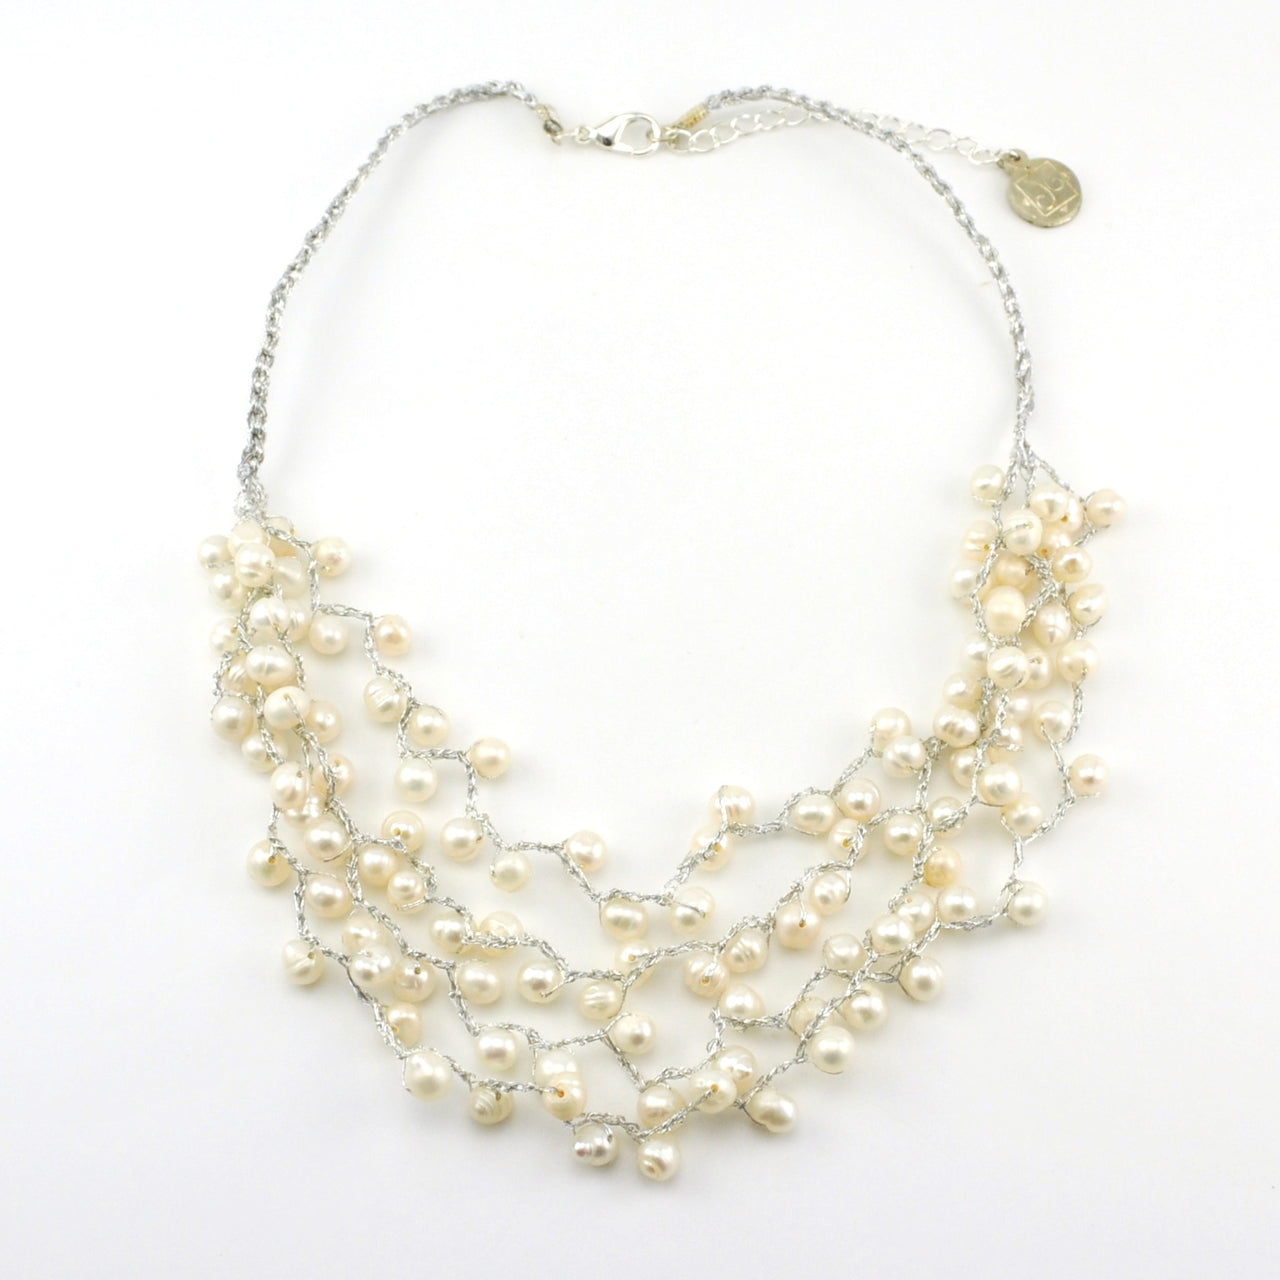 Japanese Silk Cascading White Pearl Necklace